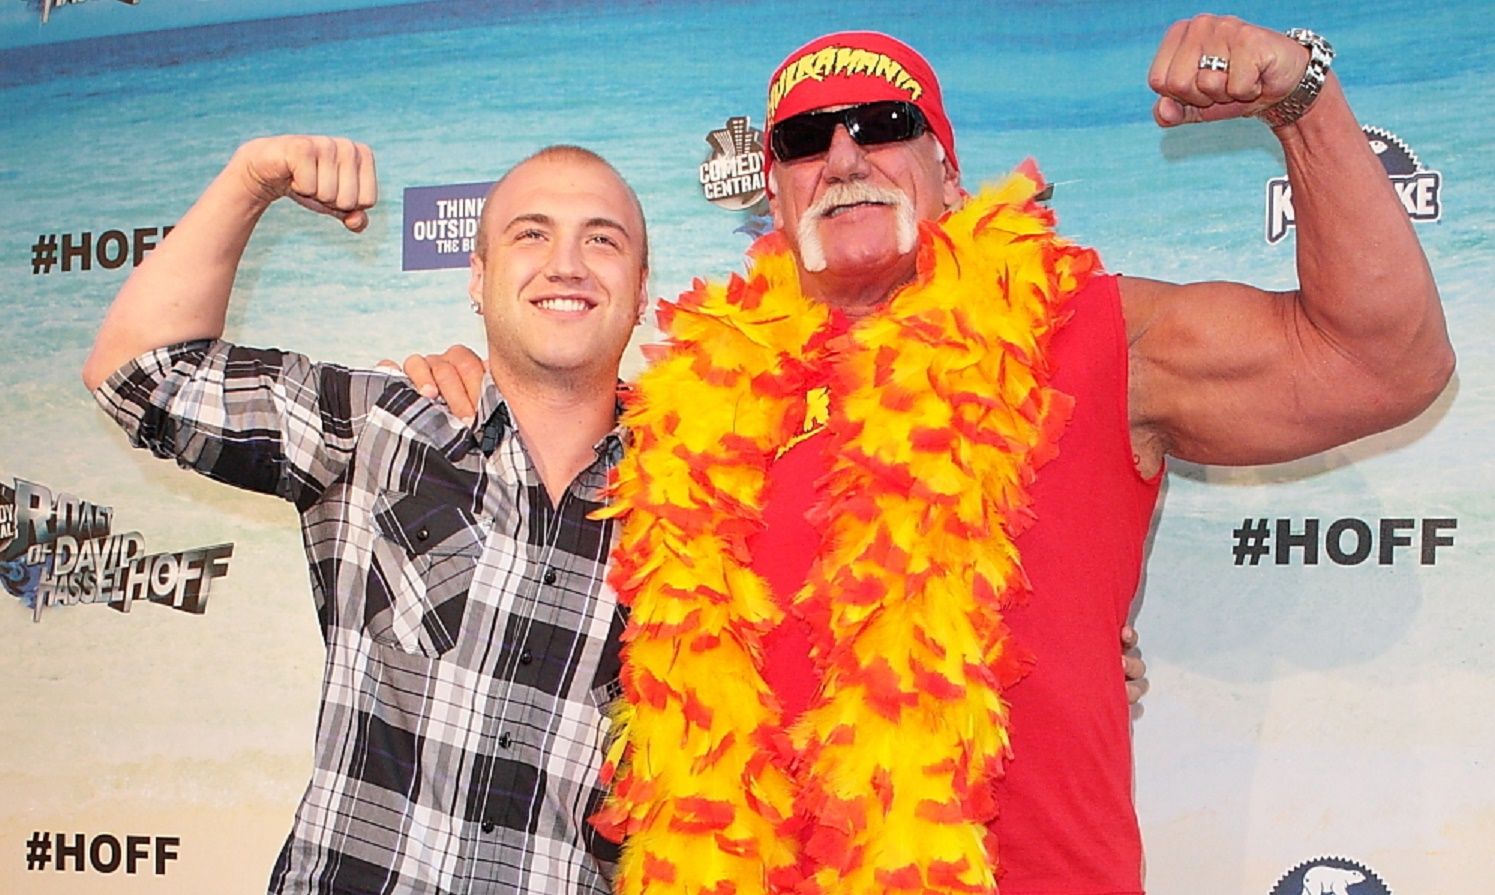 Top 15 Red Flags We Should've Noticed On Hogan Knows Best